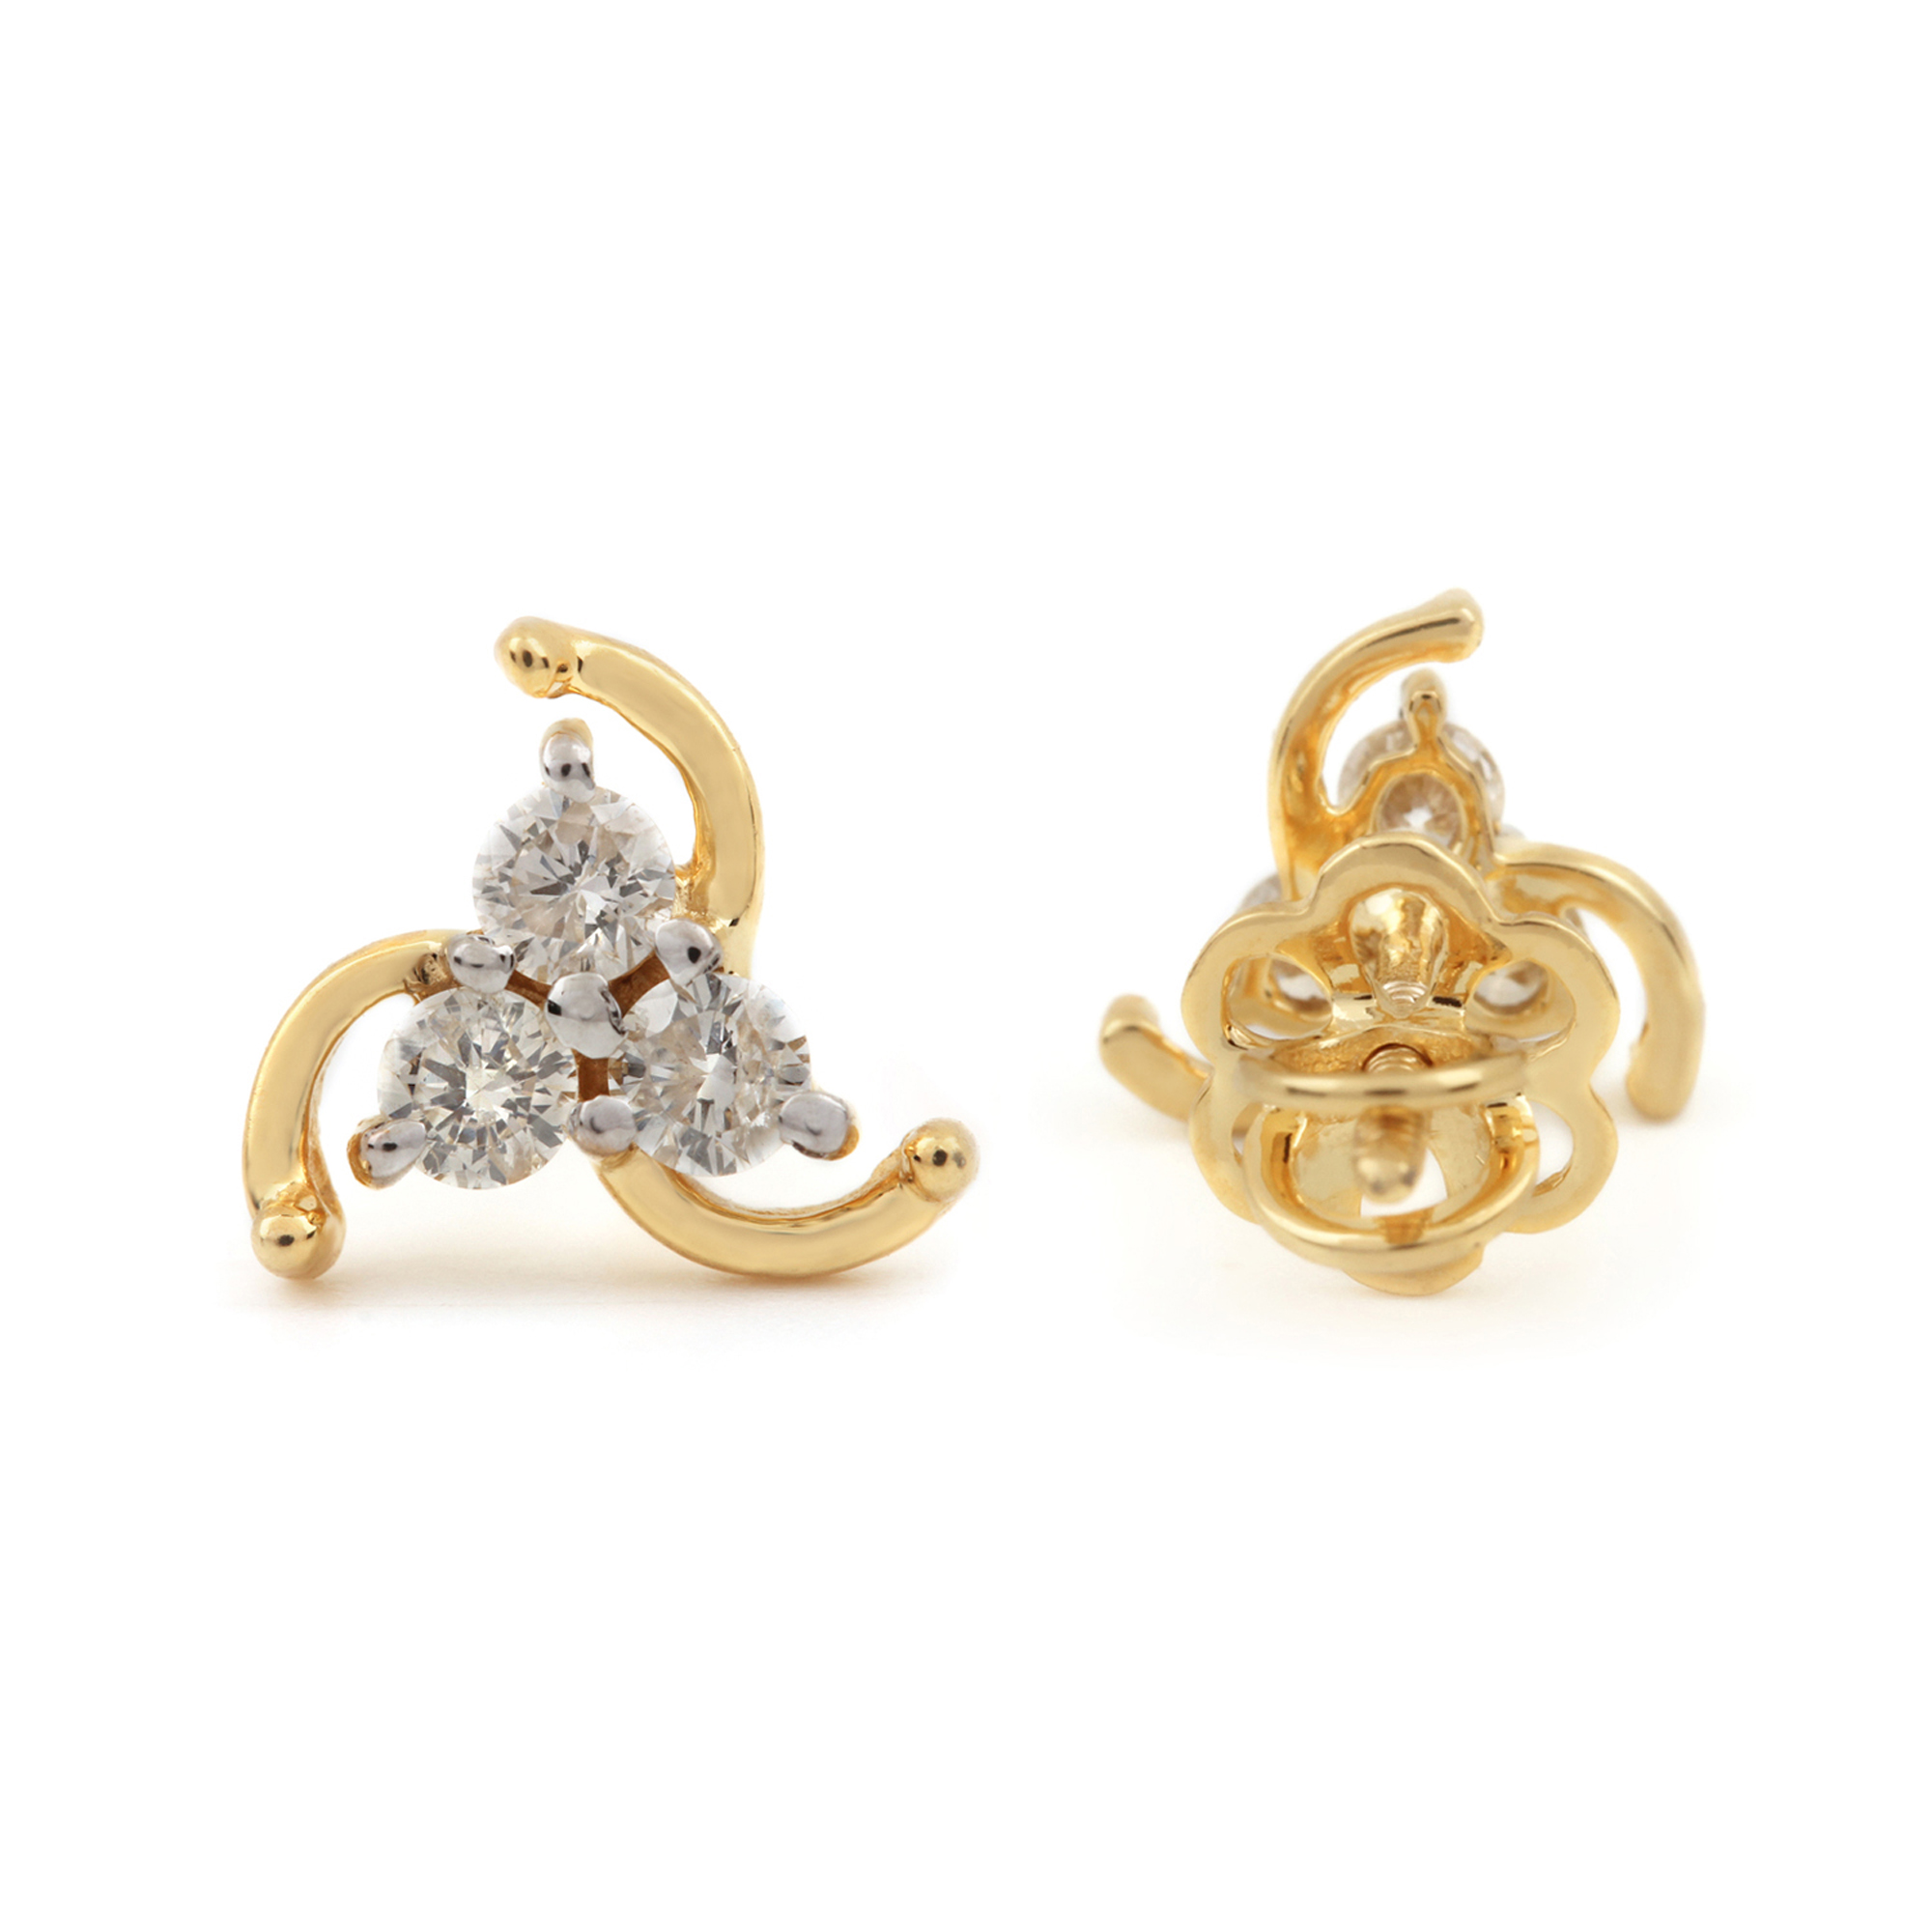 Solid 14k Yellow Gold Natural Diamond Earrings